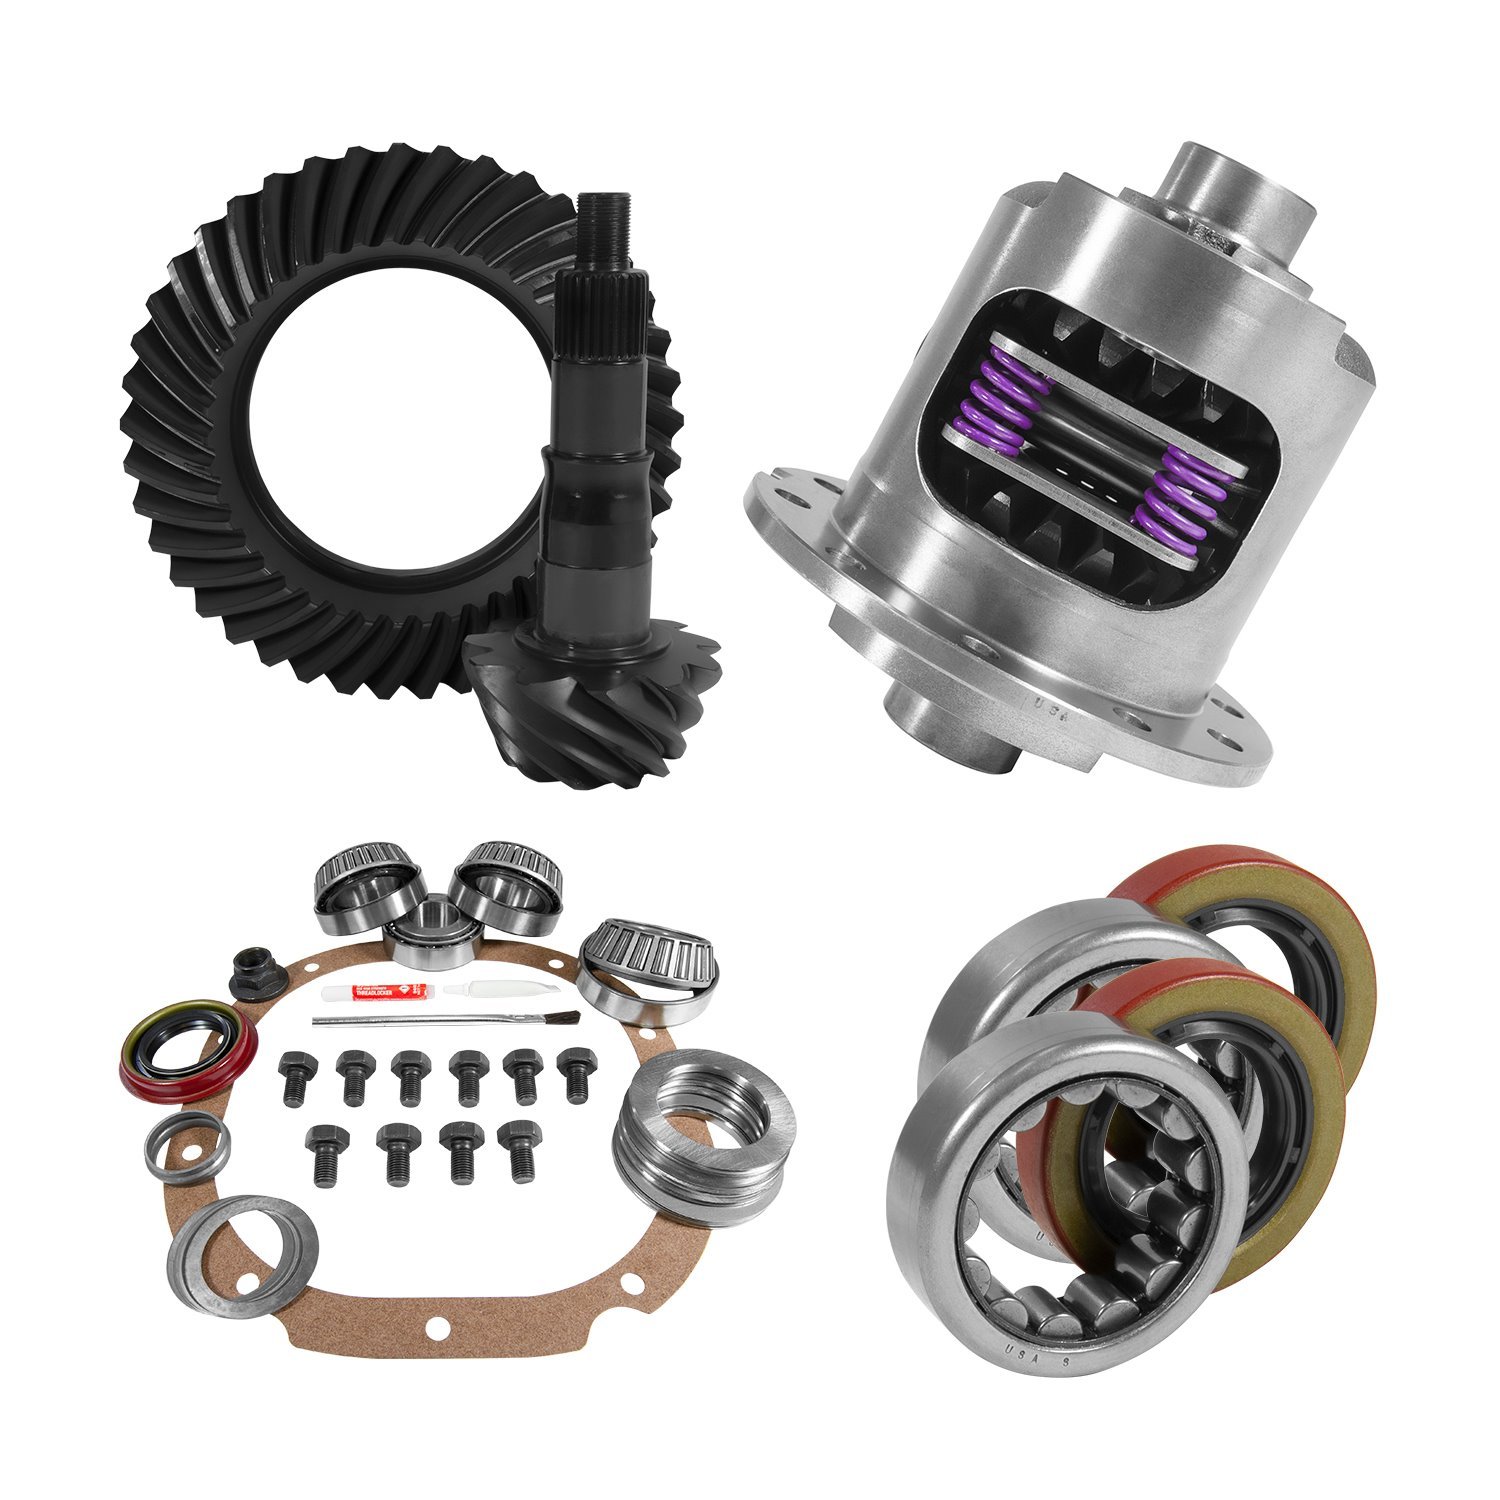 USA Standard 10678 8.8 in. Ford 3.73 Rear Ring & Pinion Install Kit, 28Spl Posi, 2.25 in. Axle Bearings